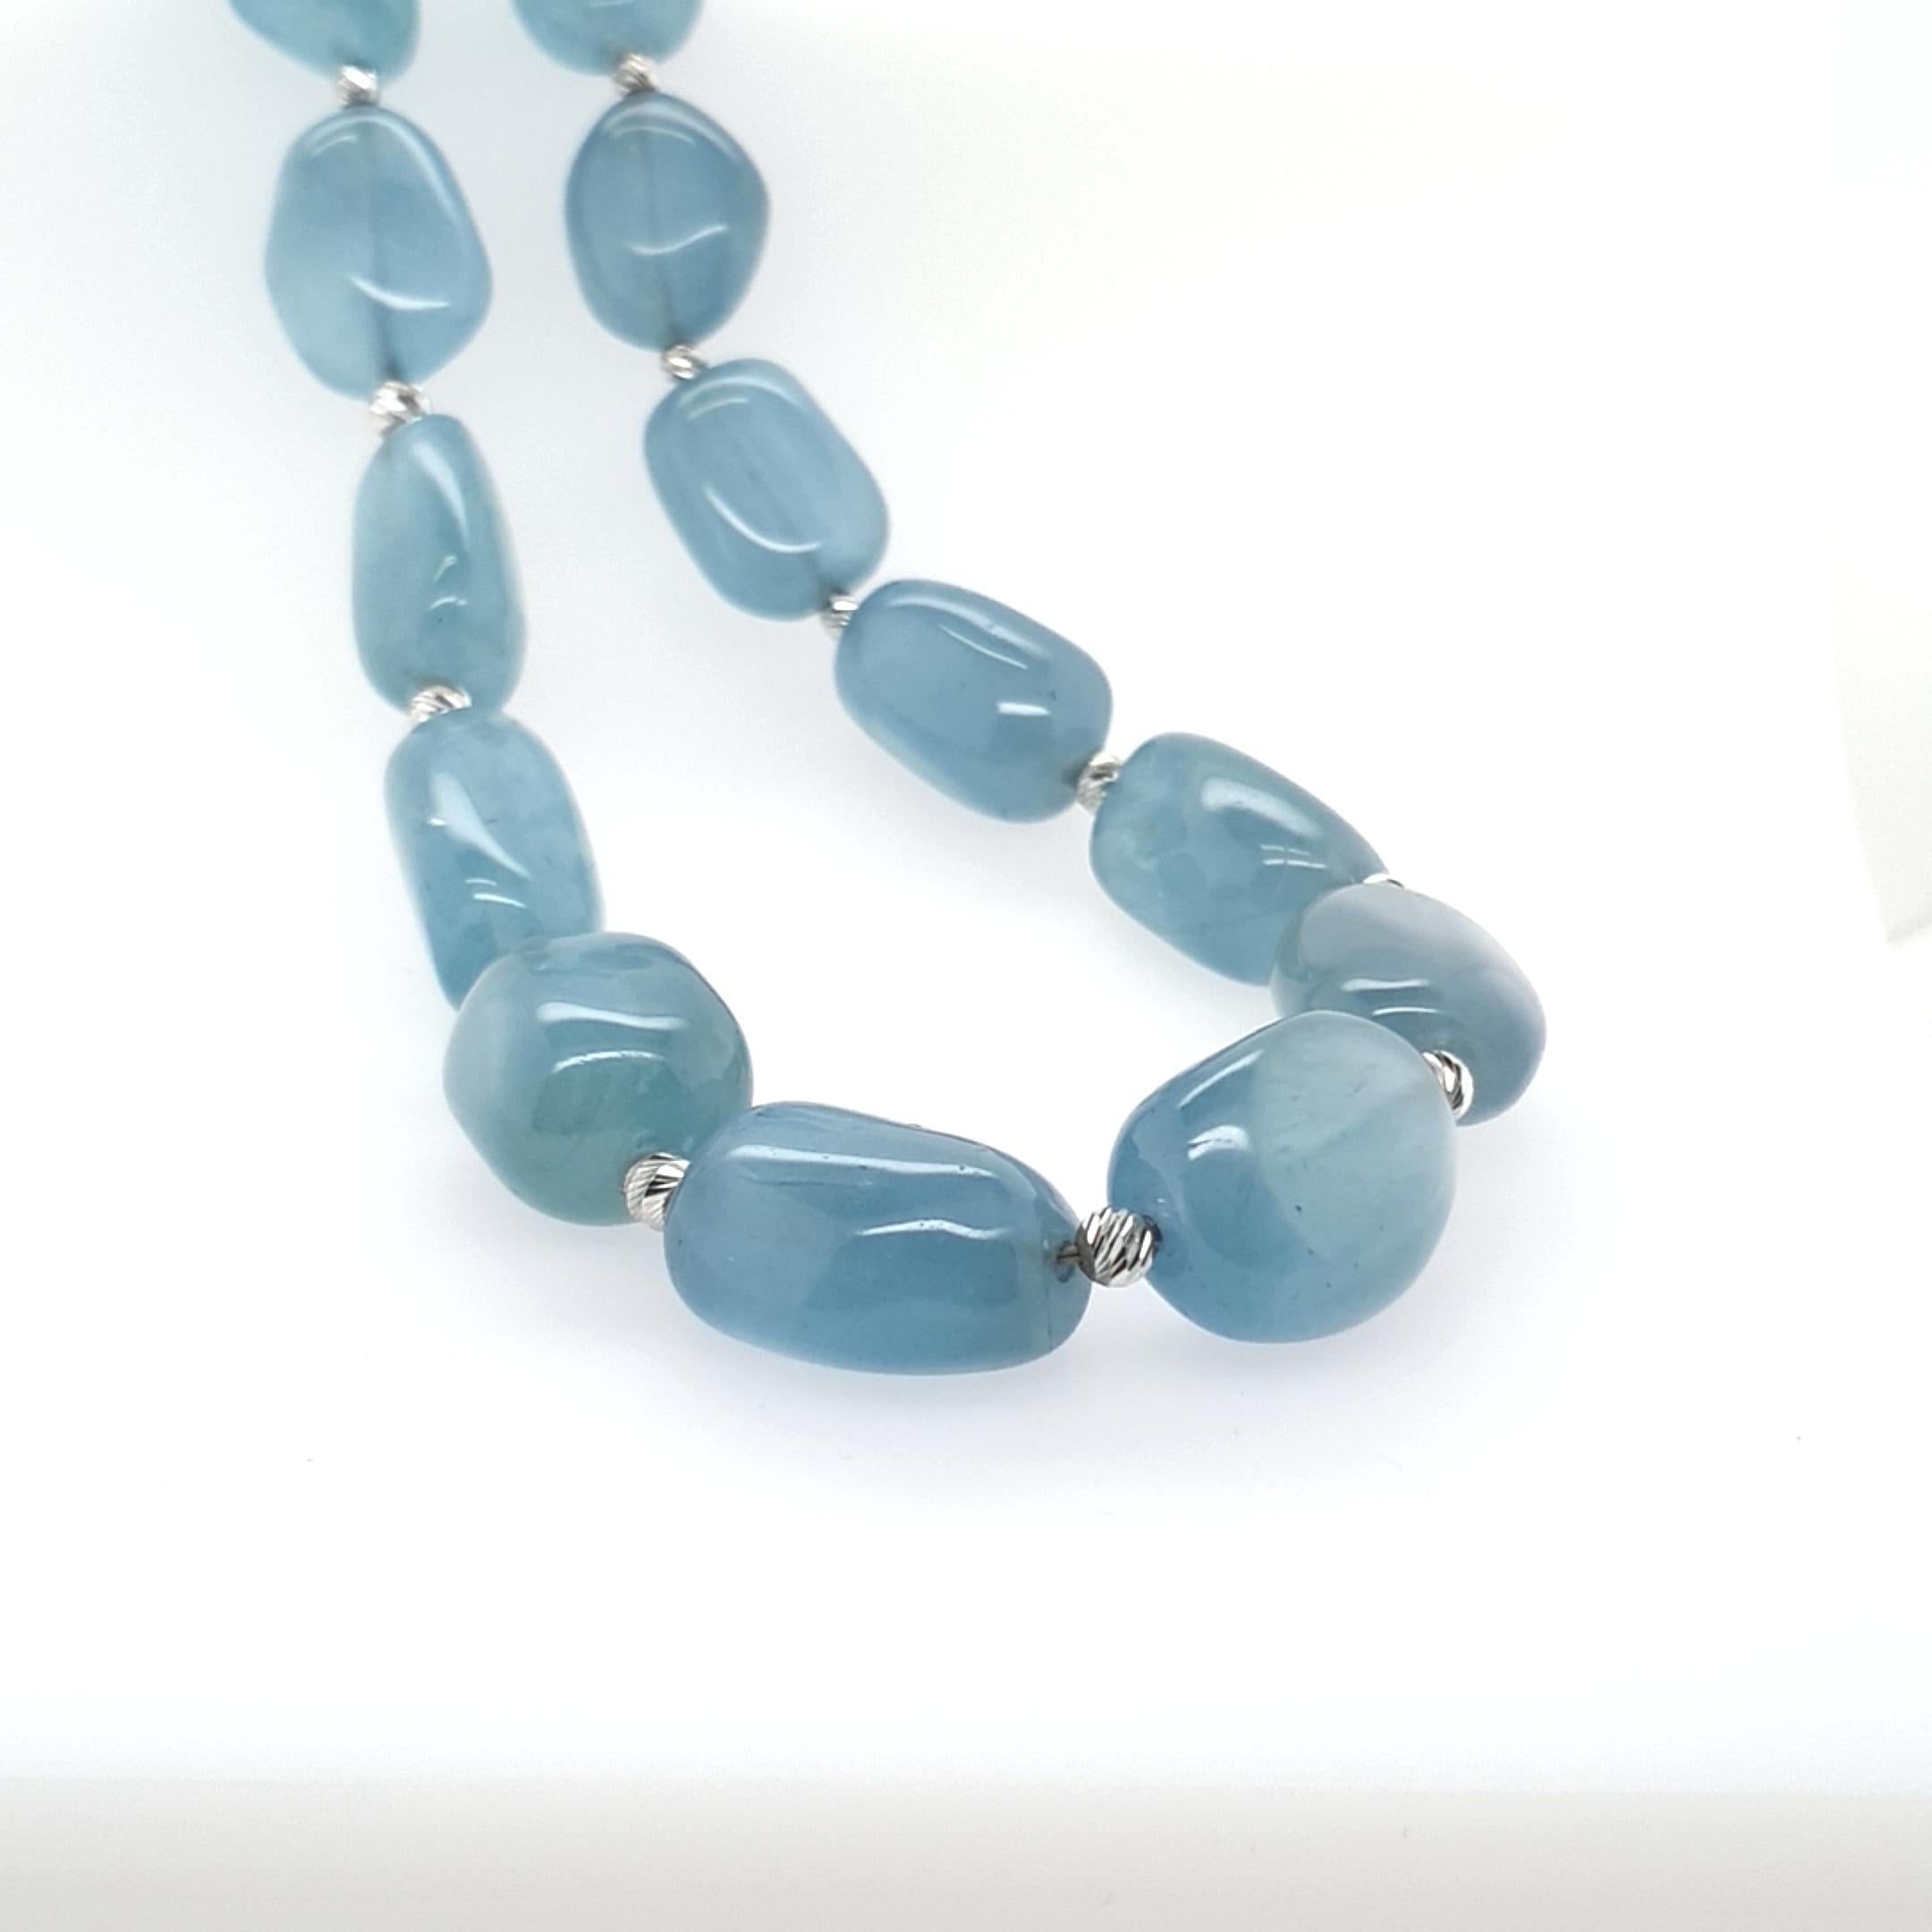 This Milky Blue Aquamarine Baroque Beaded Necklace with 18 Carat White Gold is totally handmade on German quality standard.
A timeless and classic design combined with intense Aquamarine and 18k Gold reveal an individuel, unique and exclusive